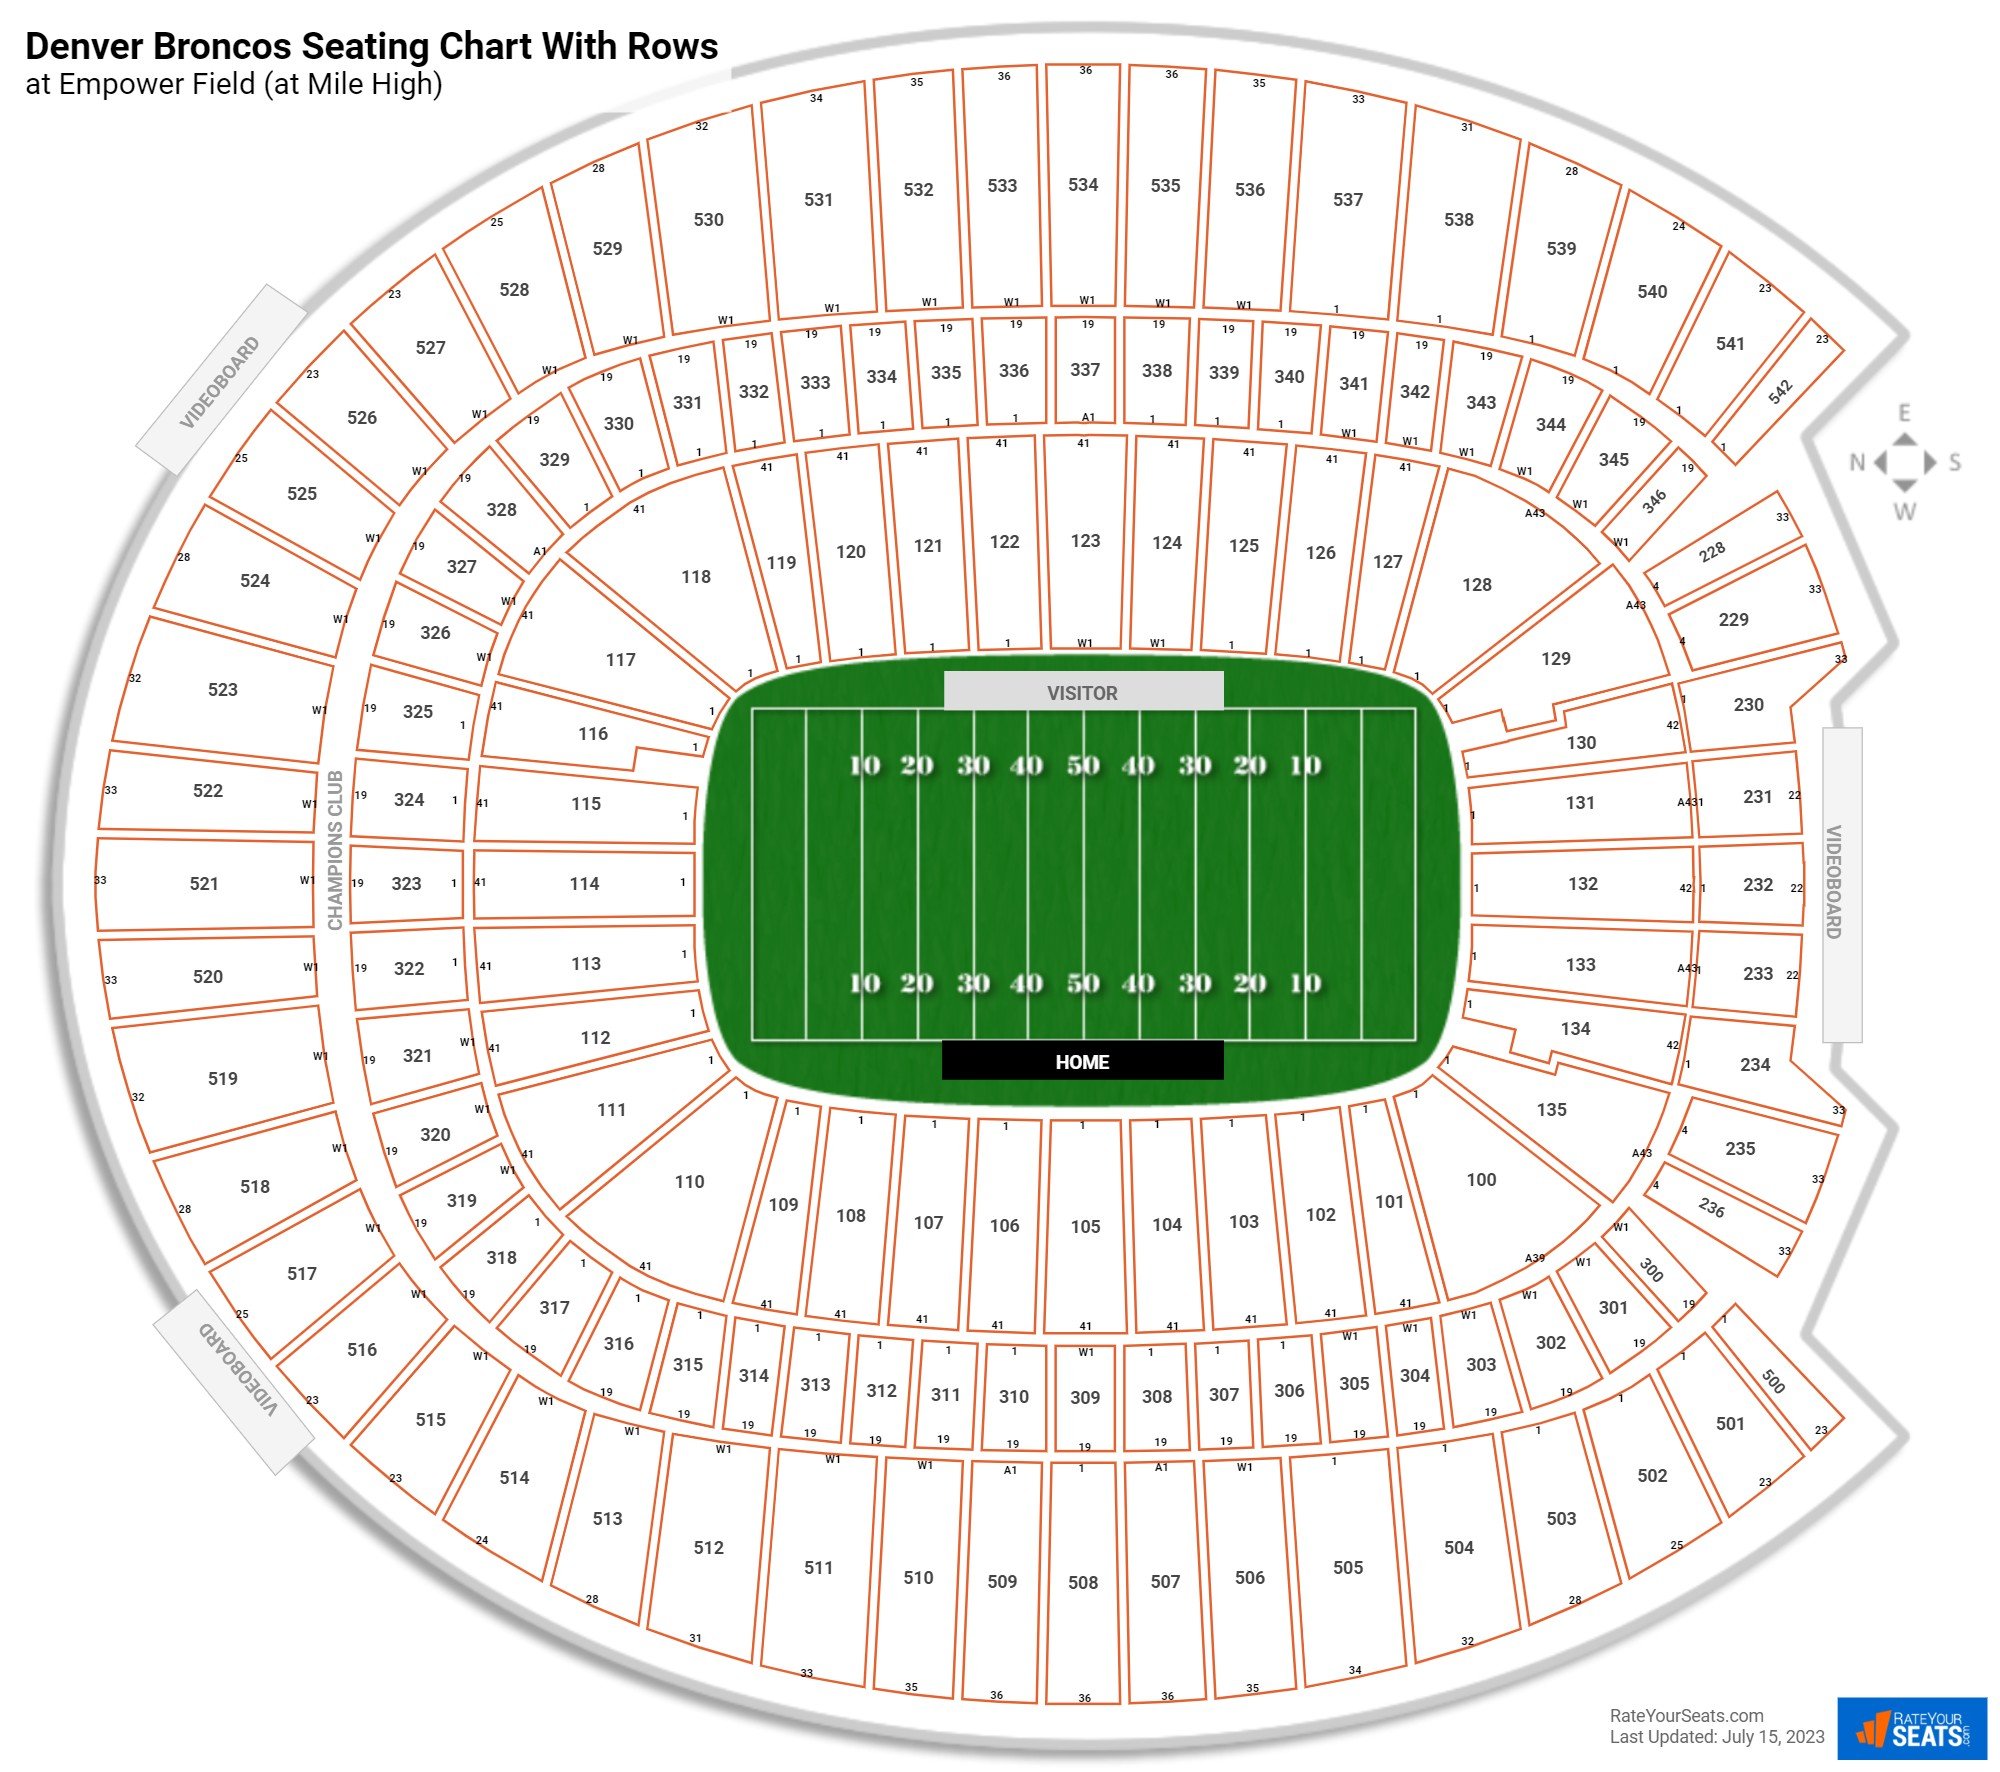 Empower Field At Mile High Tickets & Seating Chart - ETC